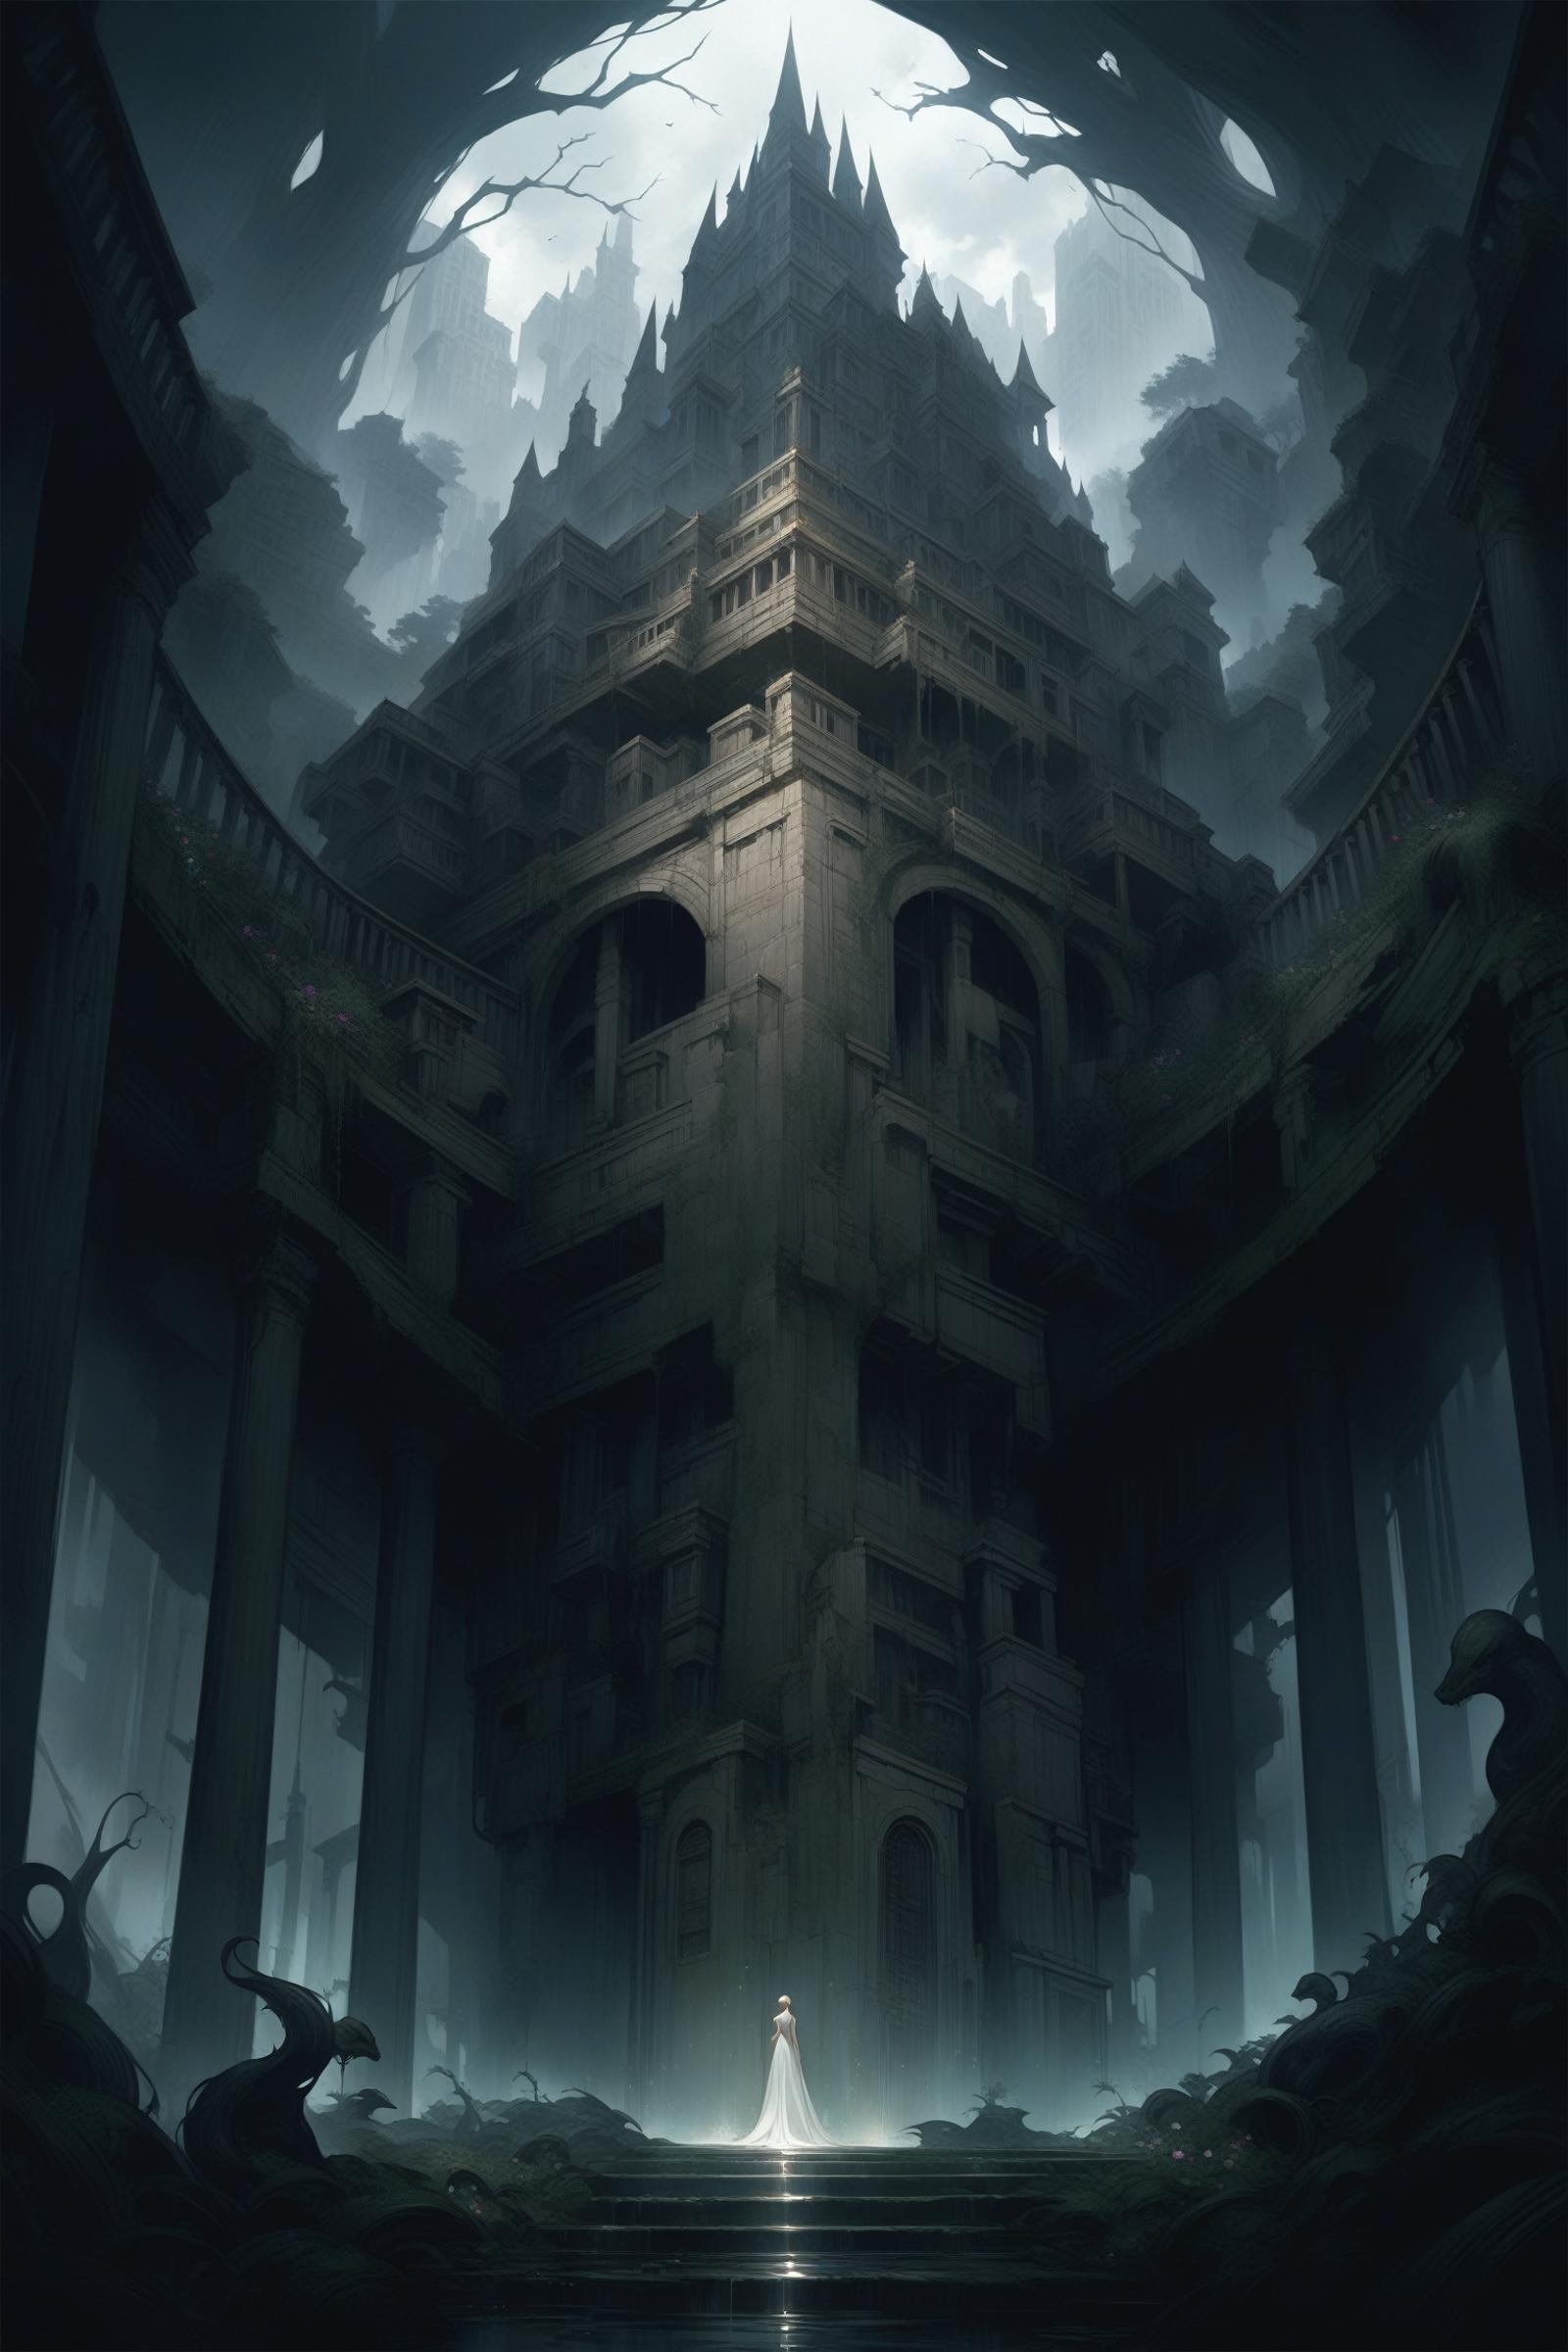 Large and Majestic Ancient Building with Dark and Light Elements